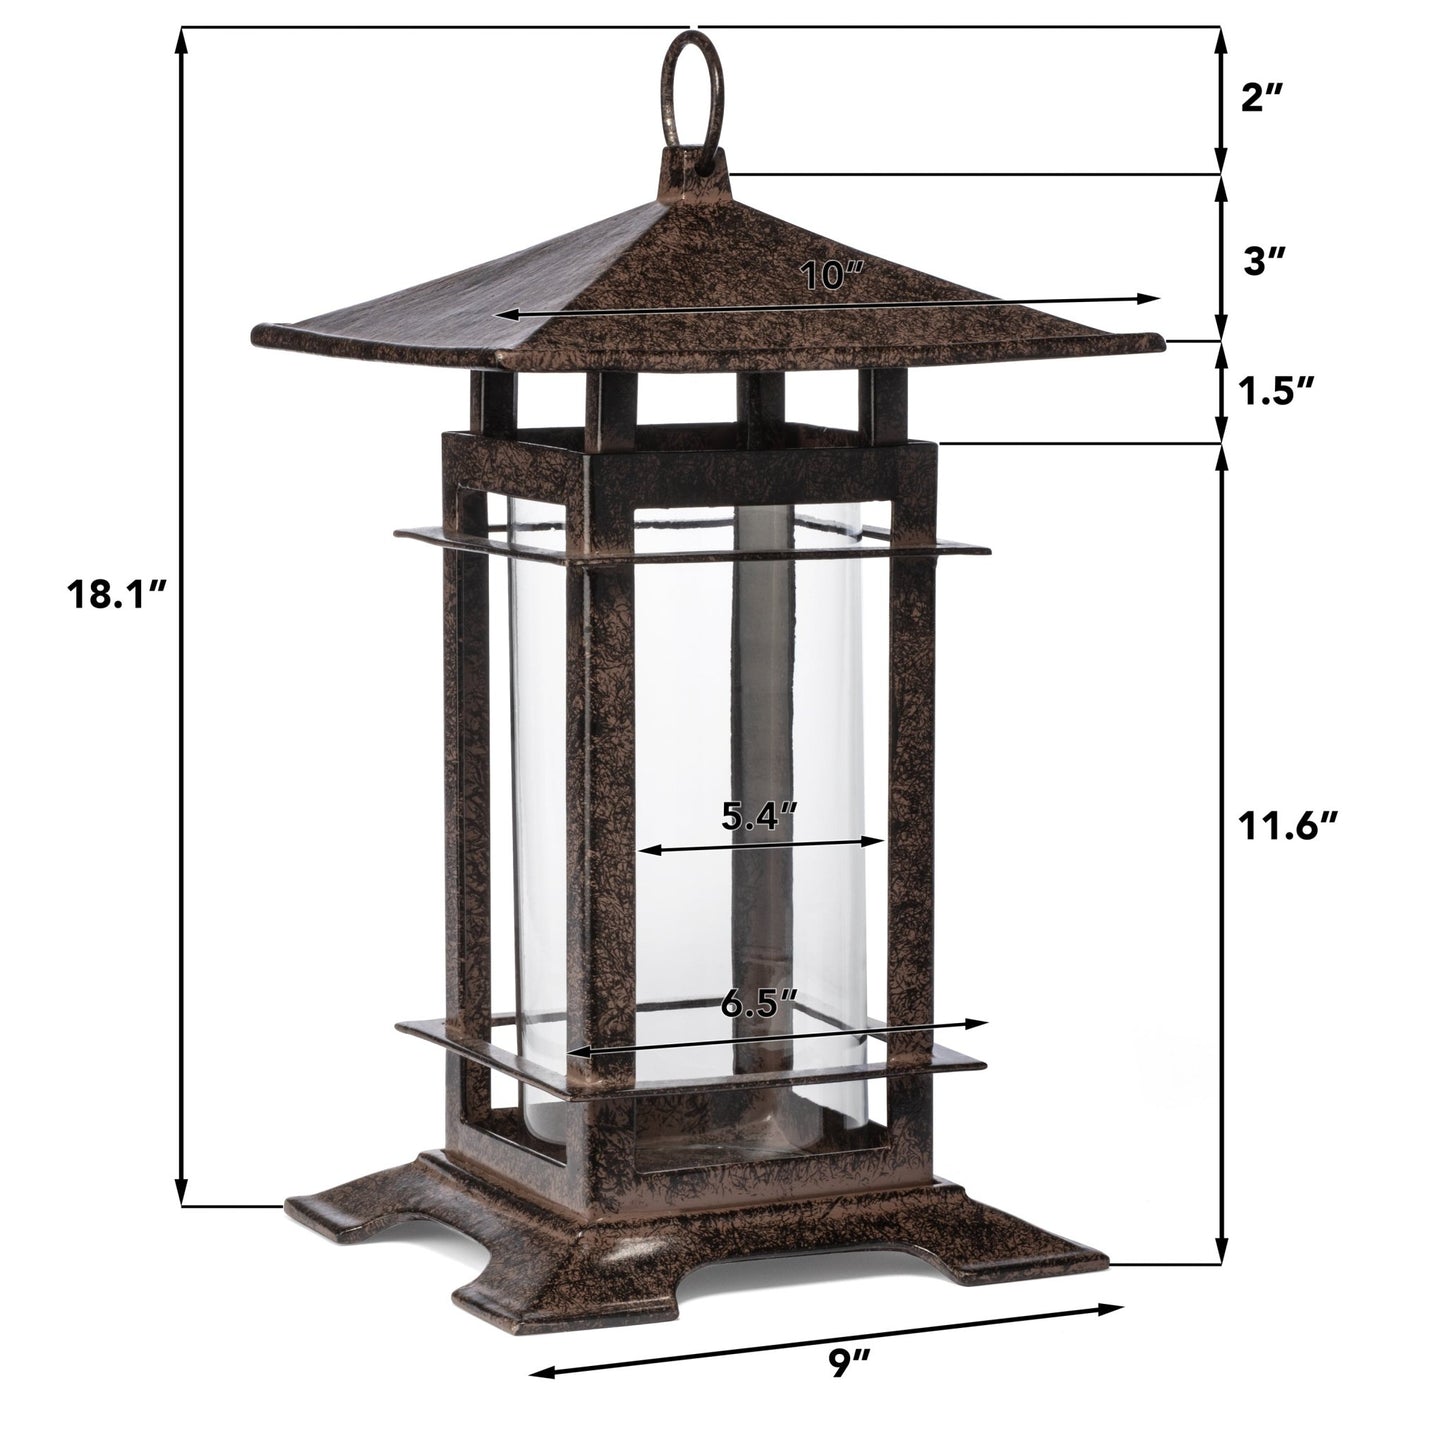 Decorative Candle Lantern Outdoor Decor Small Cast Iron Patio Candle Holder H Potter - H Potter